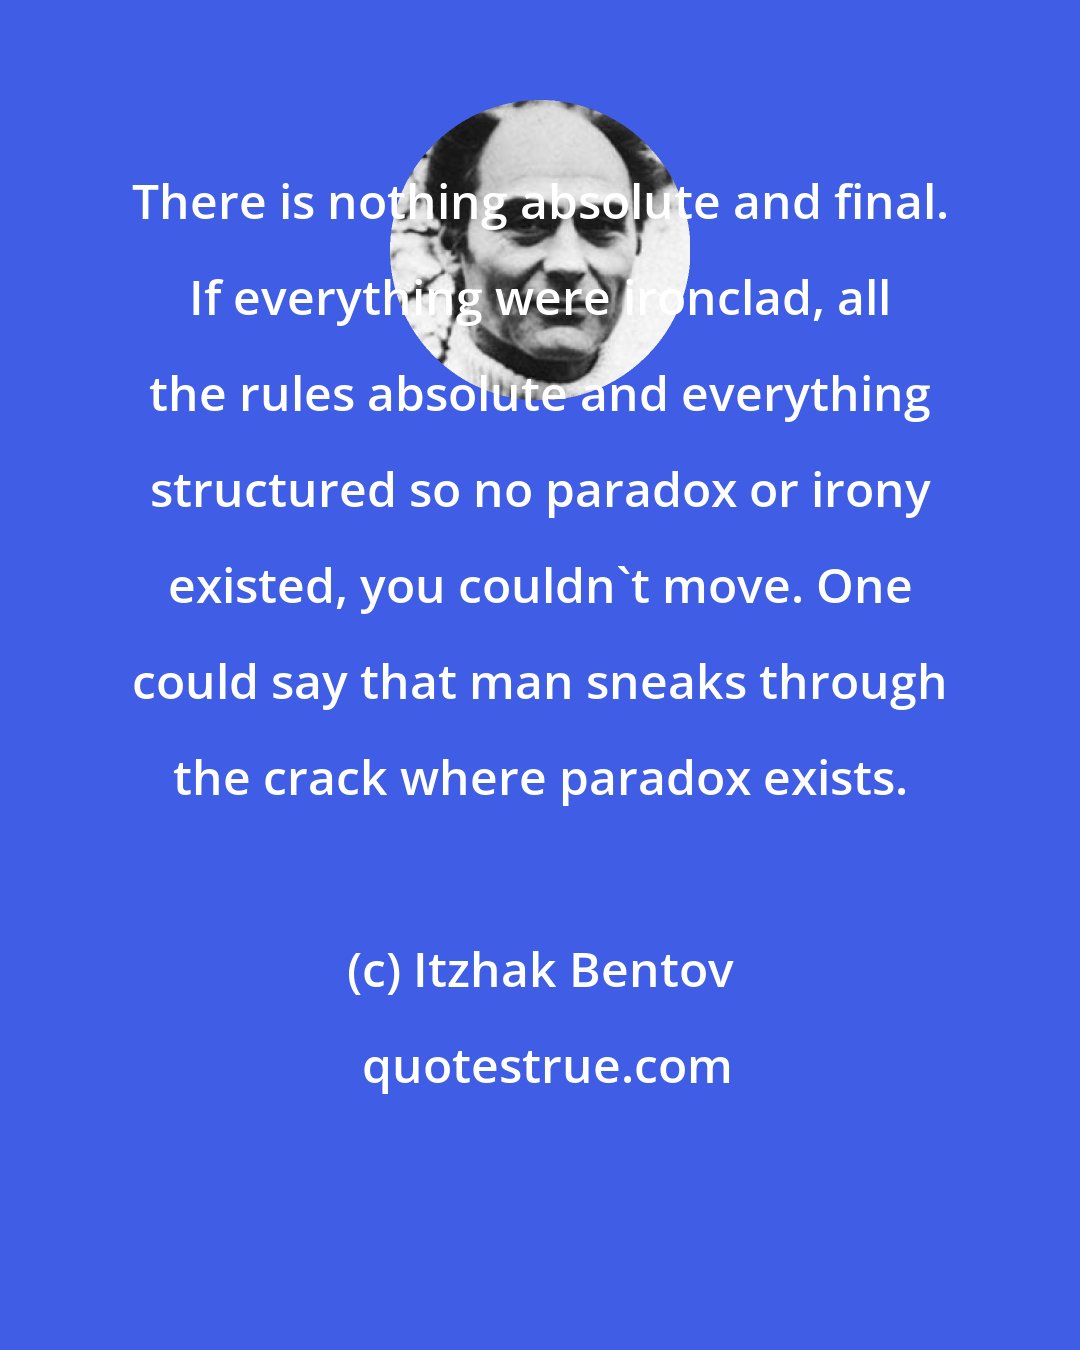 Itzhak Bentov: There is nothing absolute and final. If everything were ironclad, all the rules absolute and everything structured so no paradox or irony existed, you couldn't move. One could say that man sneaks through the crack where paradox exists.